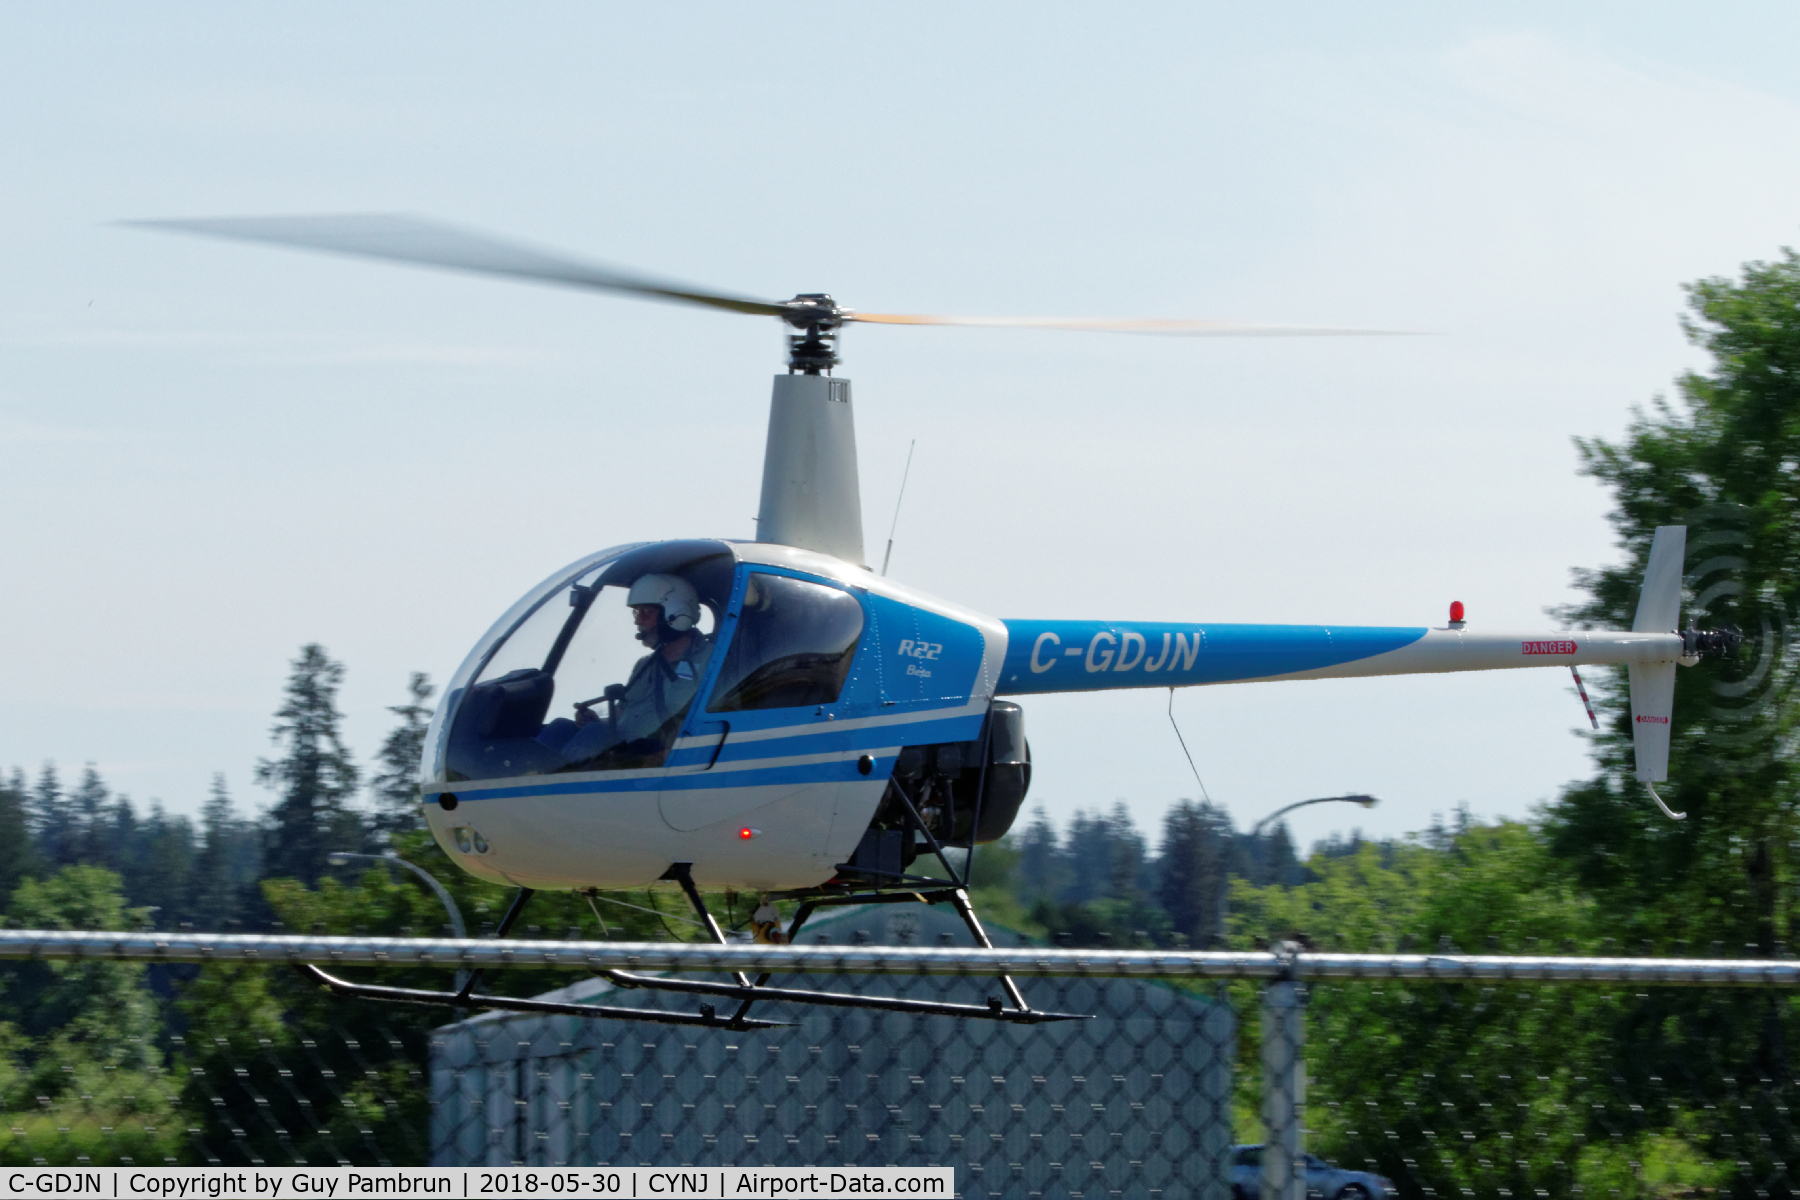 C-GDJN, 1991 Robinson R22 Beta C/N 1795, I think he's going to the fuel pumps but I'm not 100% certain